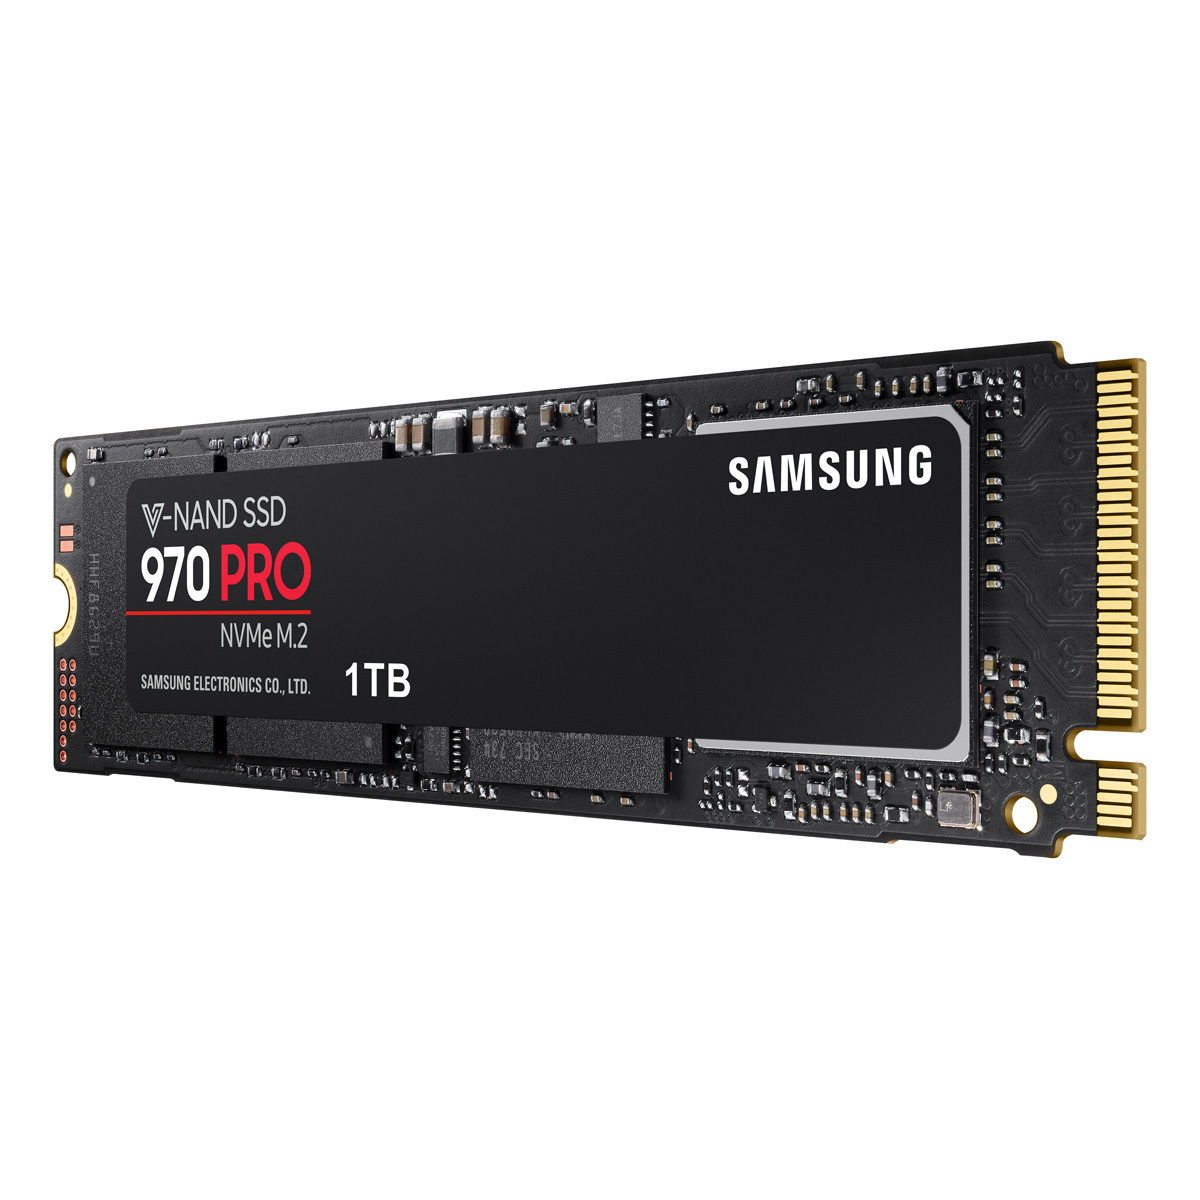 Preferential treatment Minimize Accessible SSD 970 PRO (M.2/NVMe) – ITGマーケティング株式会社